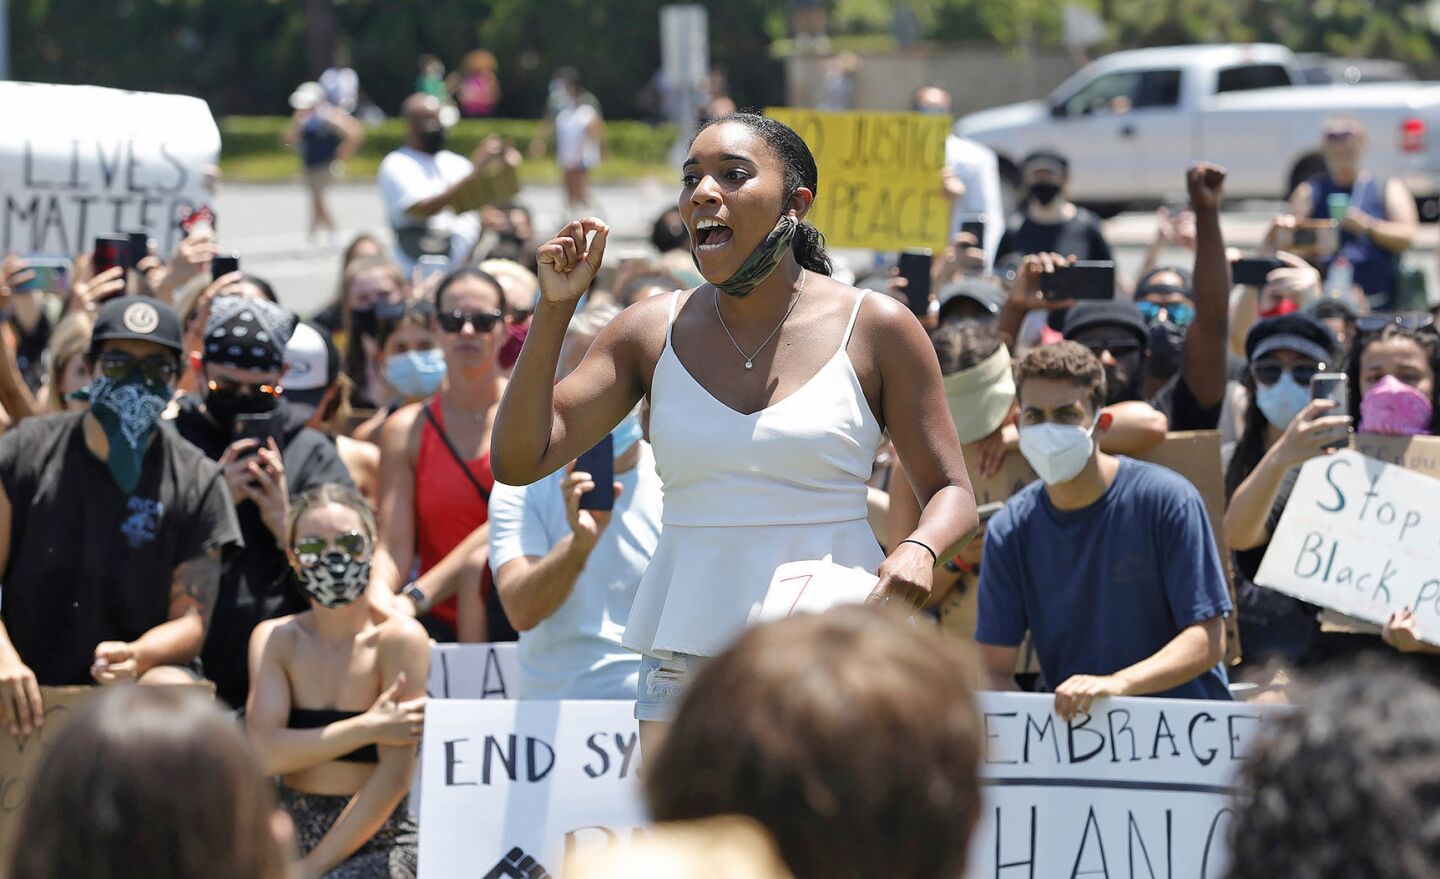 Organizer Alesia Robinson brings together peaceful protesters to thank them for their participation during a Black Lives Matter protest in Newport Beach on Wednesday.